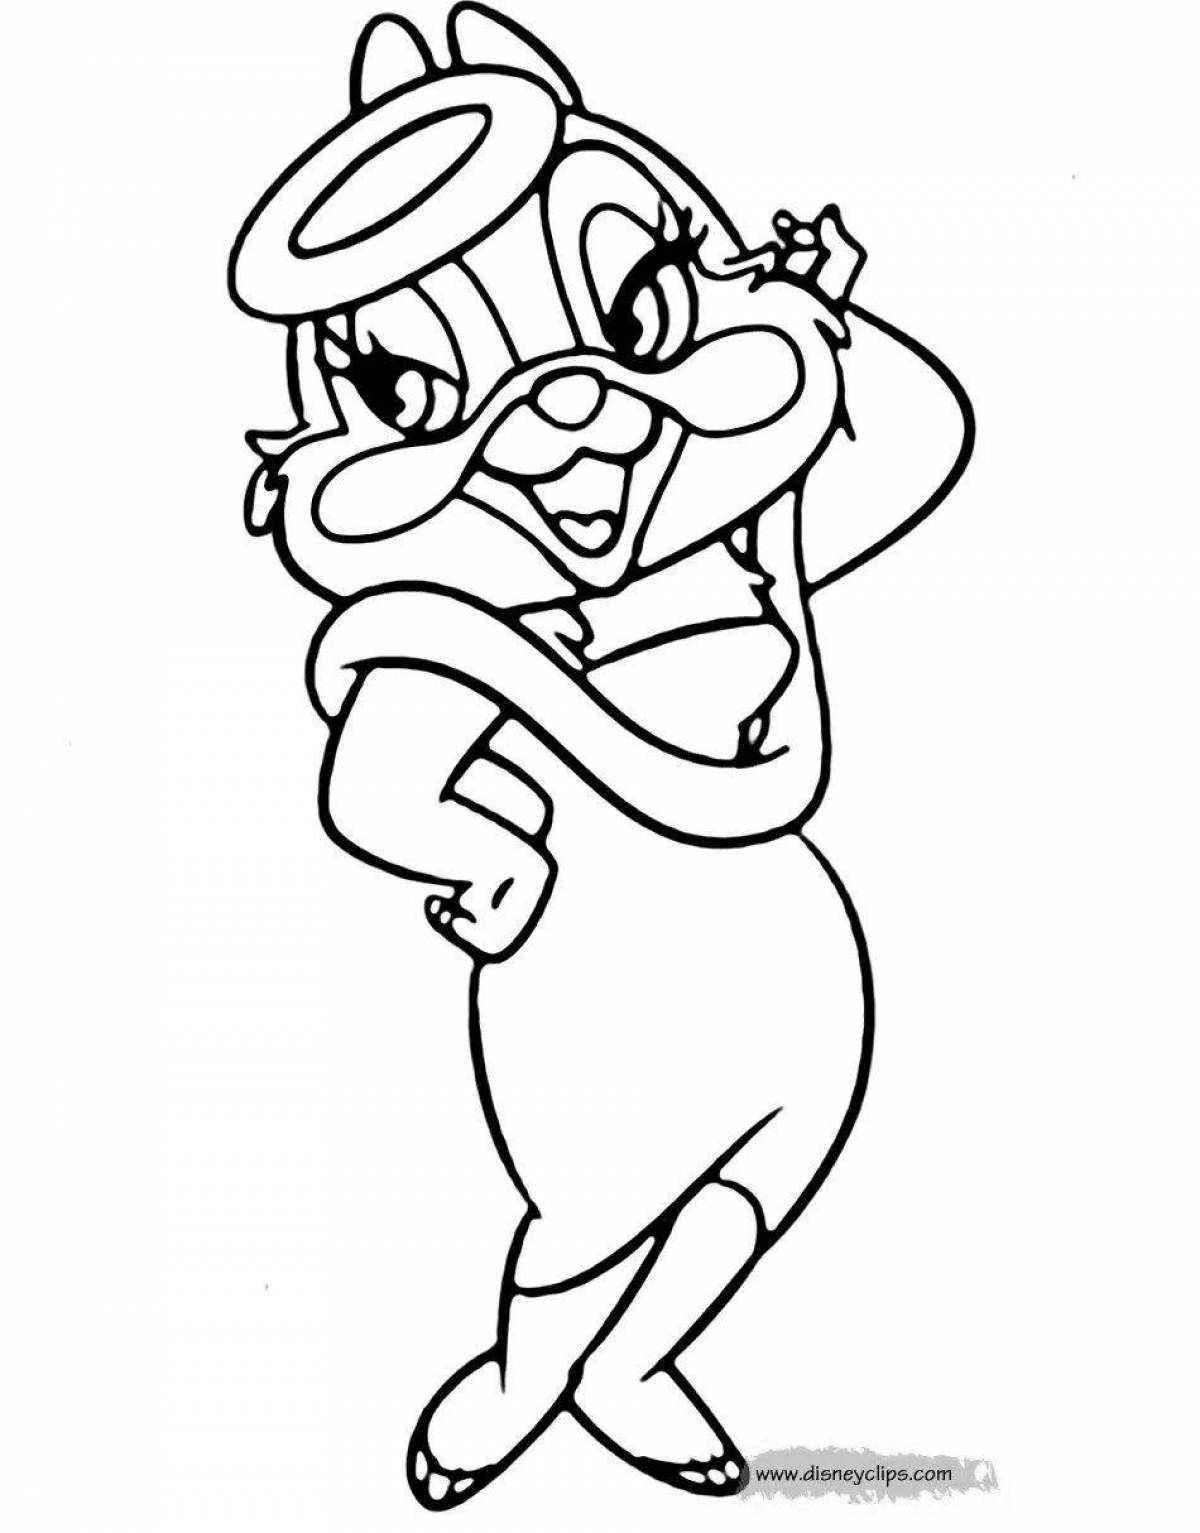 Joyful chip and dale save the rangers coloring book